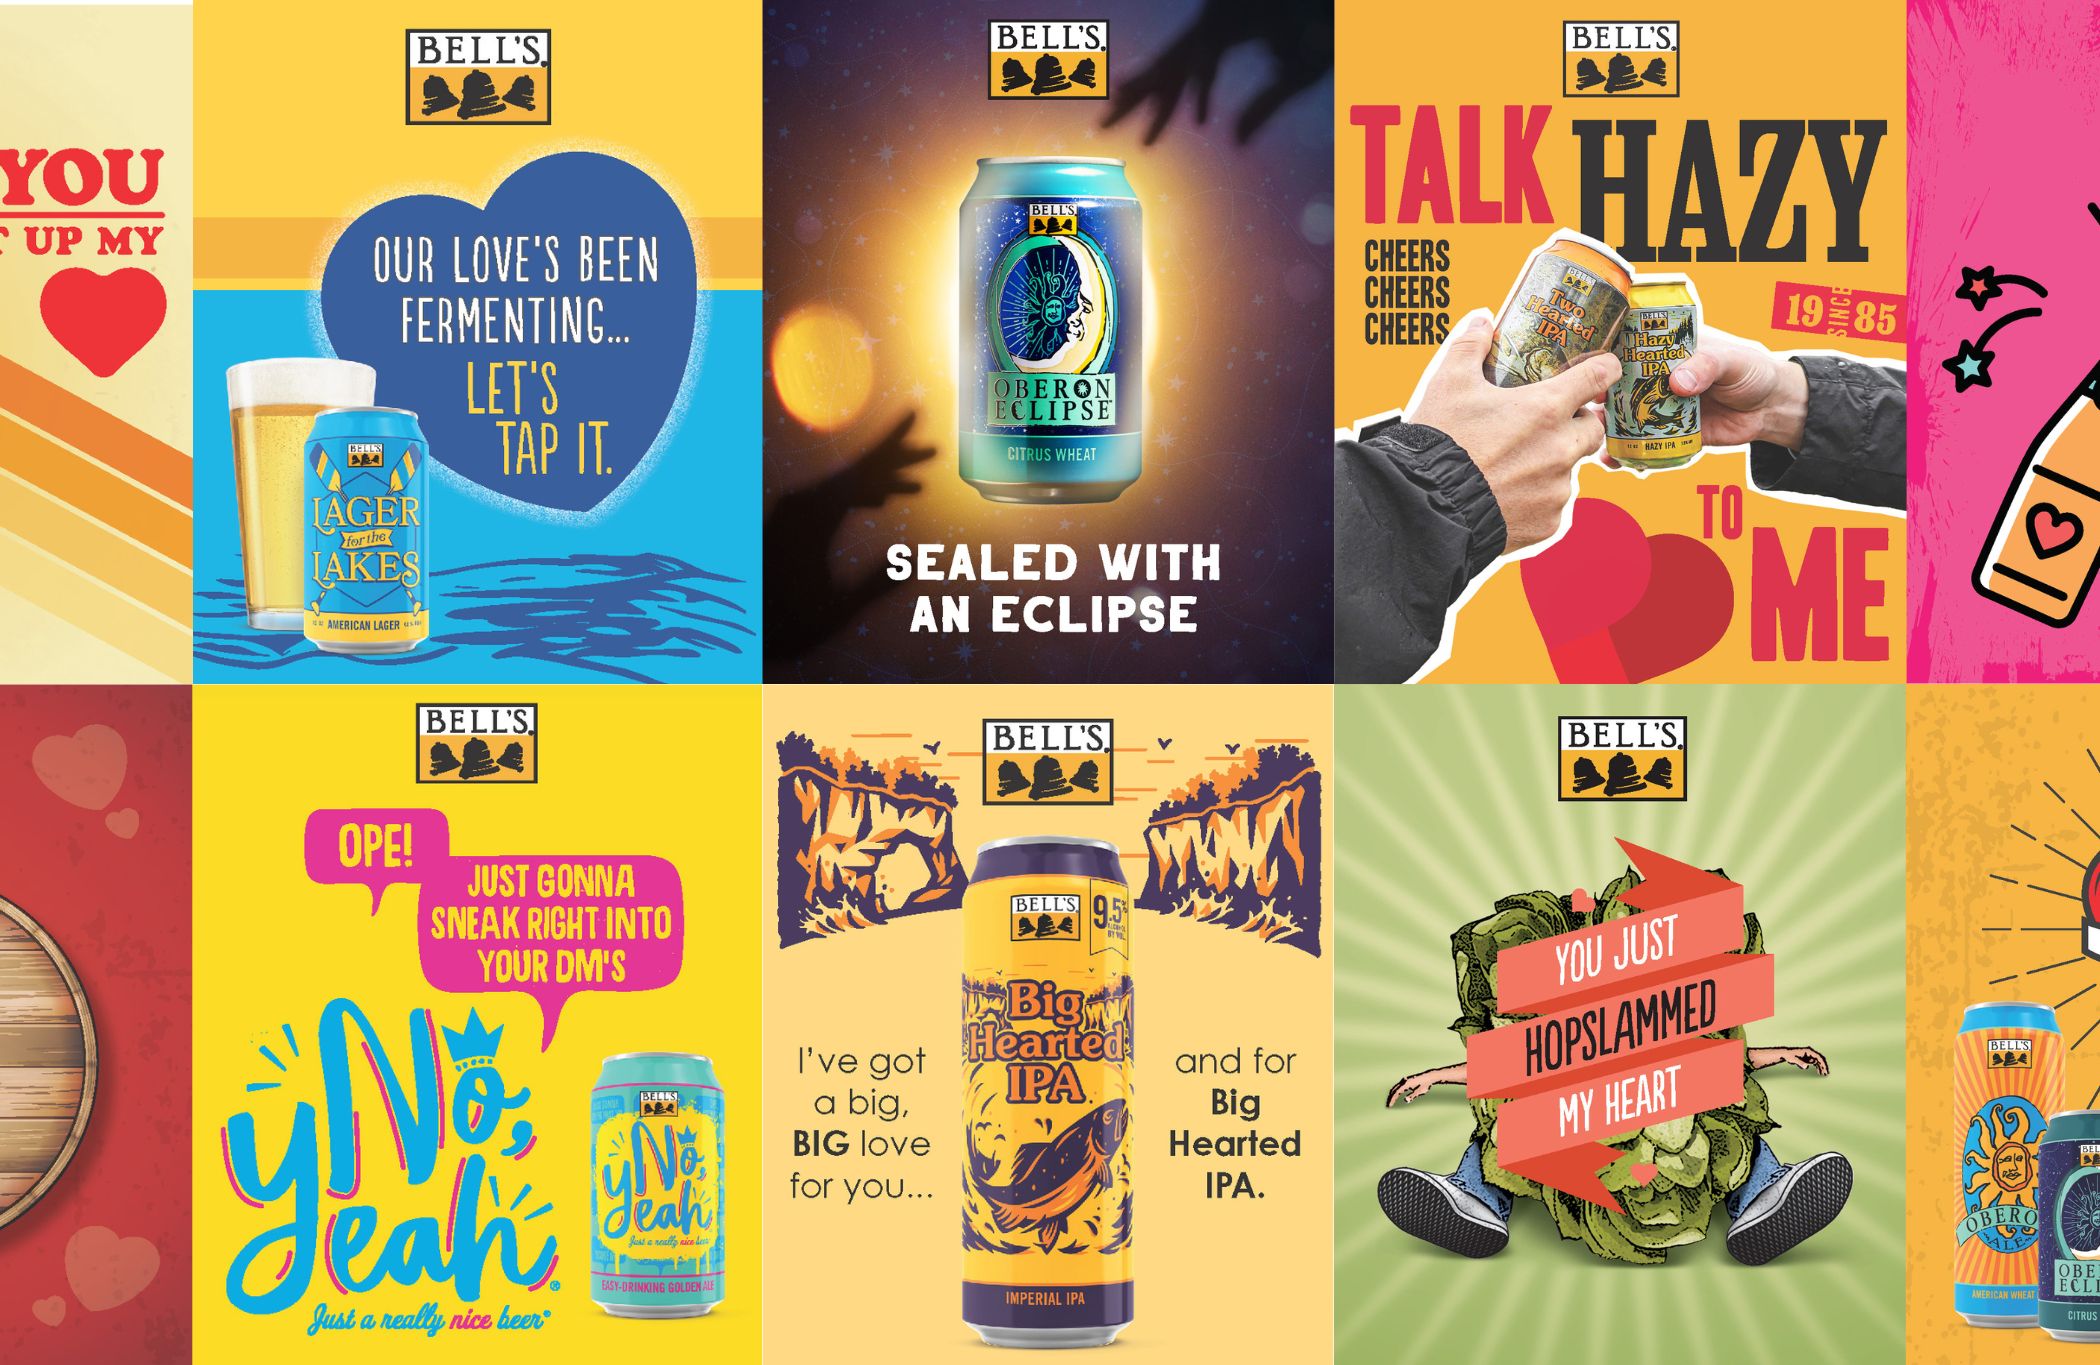 A collage of six vibrant and colorful beer advertisements from Bell's Brewery. Each features a clever beer-related pun integrated with a romantic theme and an image of a Bell's beer can. The slogans include playful phrases such as "Talk Hazy to Me," "Our love's been fermenting... Let's tap it," and "You just hopslammed my heart," among others. The background colors vary from yellow, blue, pink, and green, creating a lively and eye-catching design.